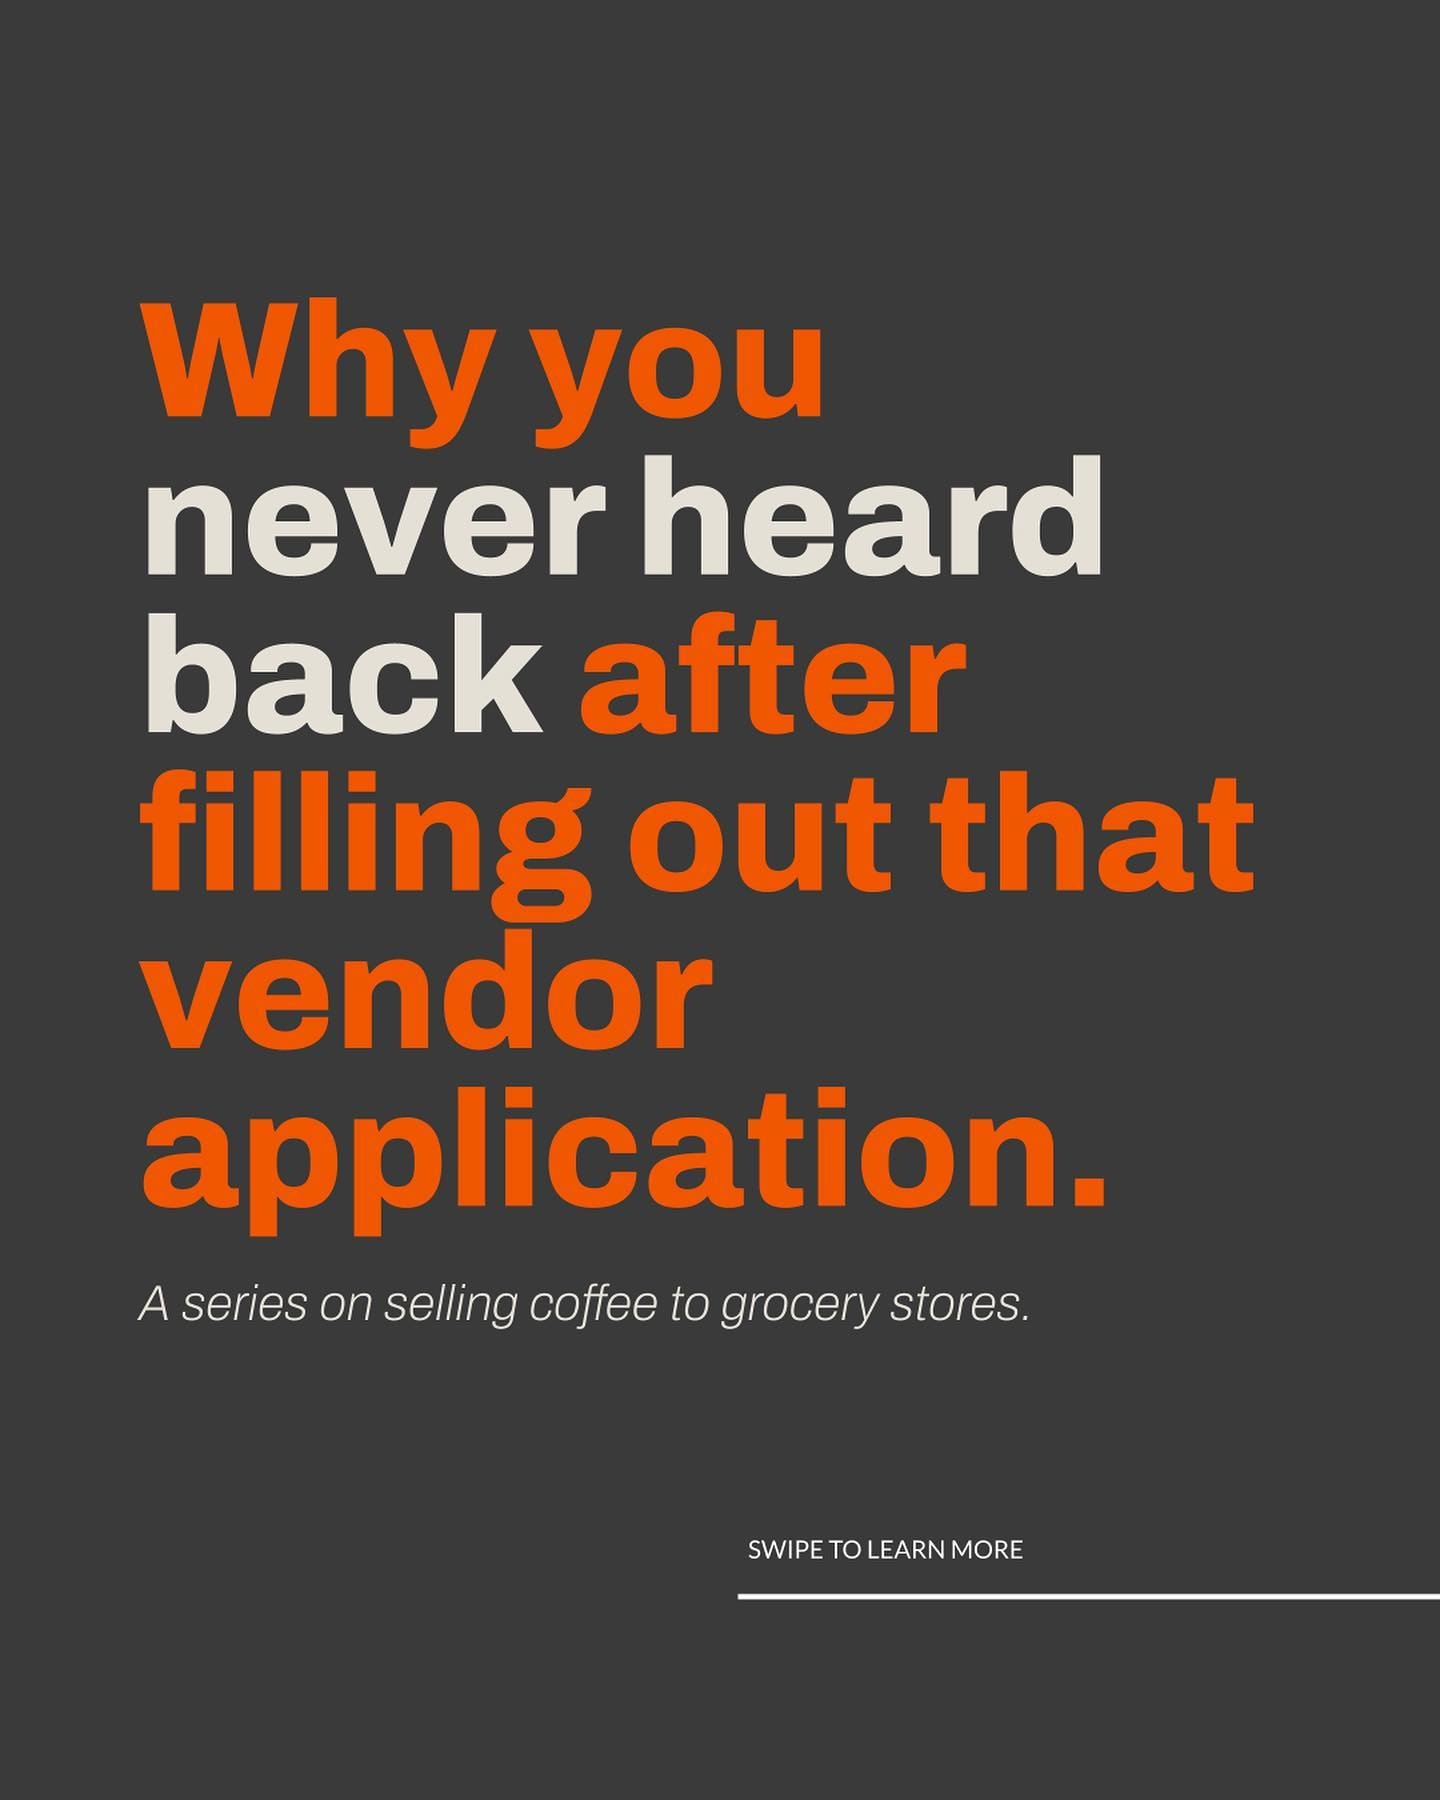 In my first wholesale coffee sales role, I got all excited after I finished filling out that first grocery vendor application. As soon as I hit the SUBMIT button, I could almost hear that classic money sound, &quot;CHA-CHING&quot; hitting my bank fro